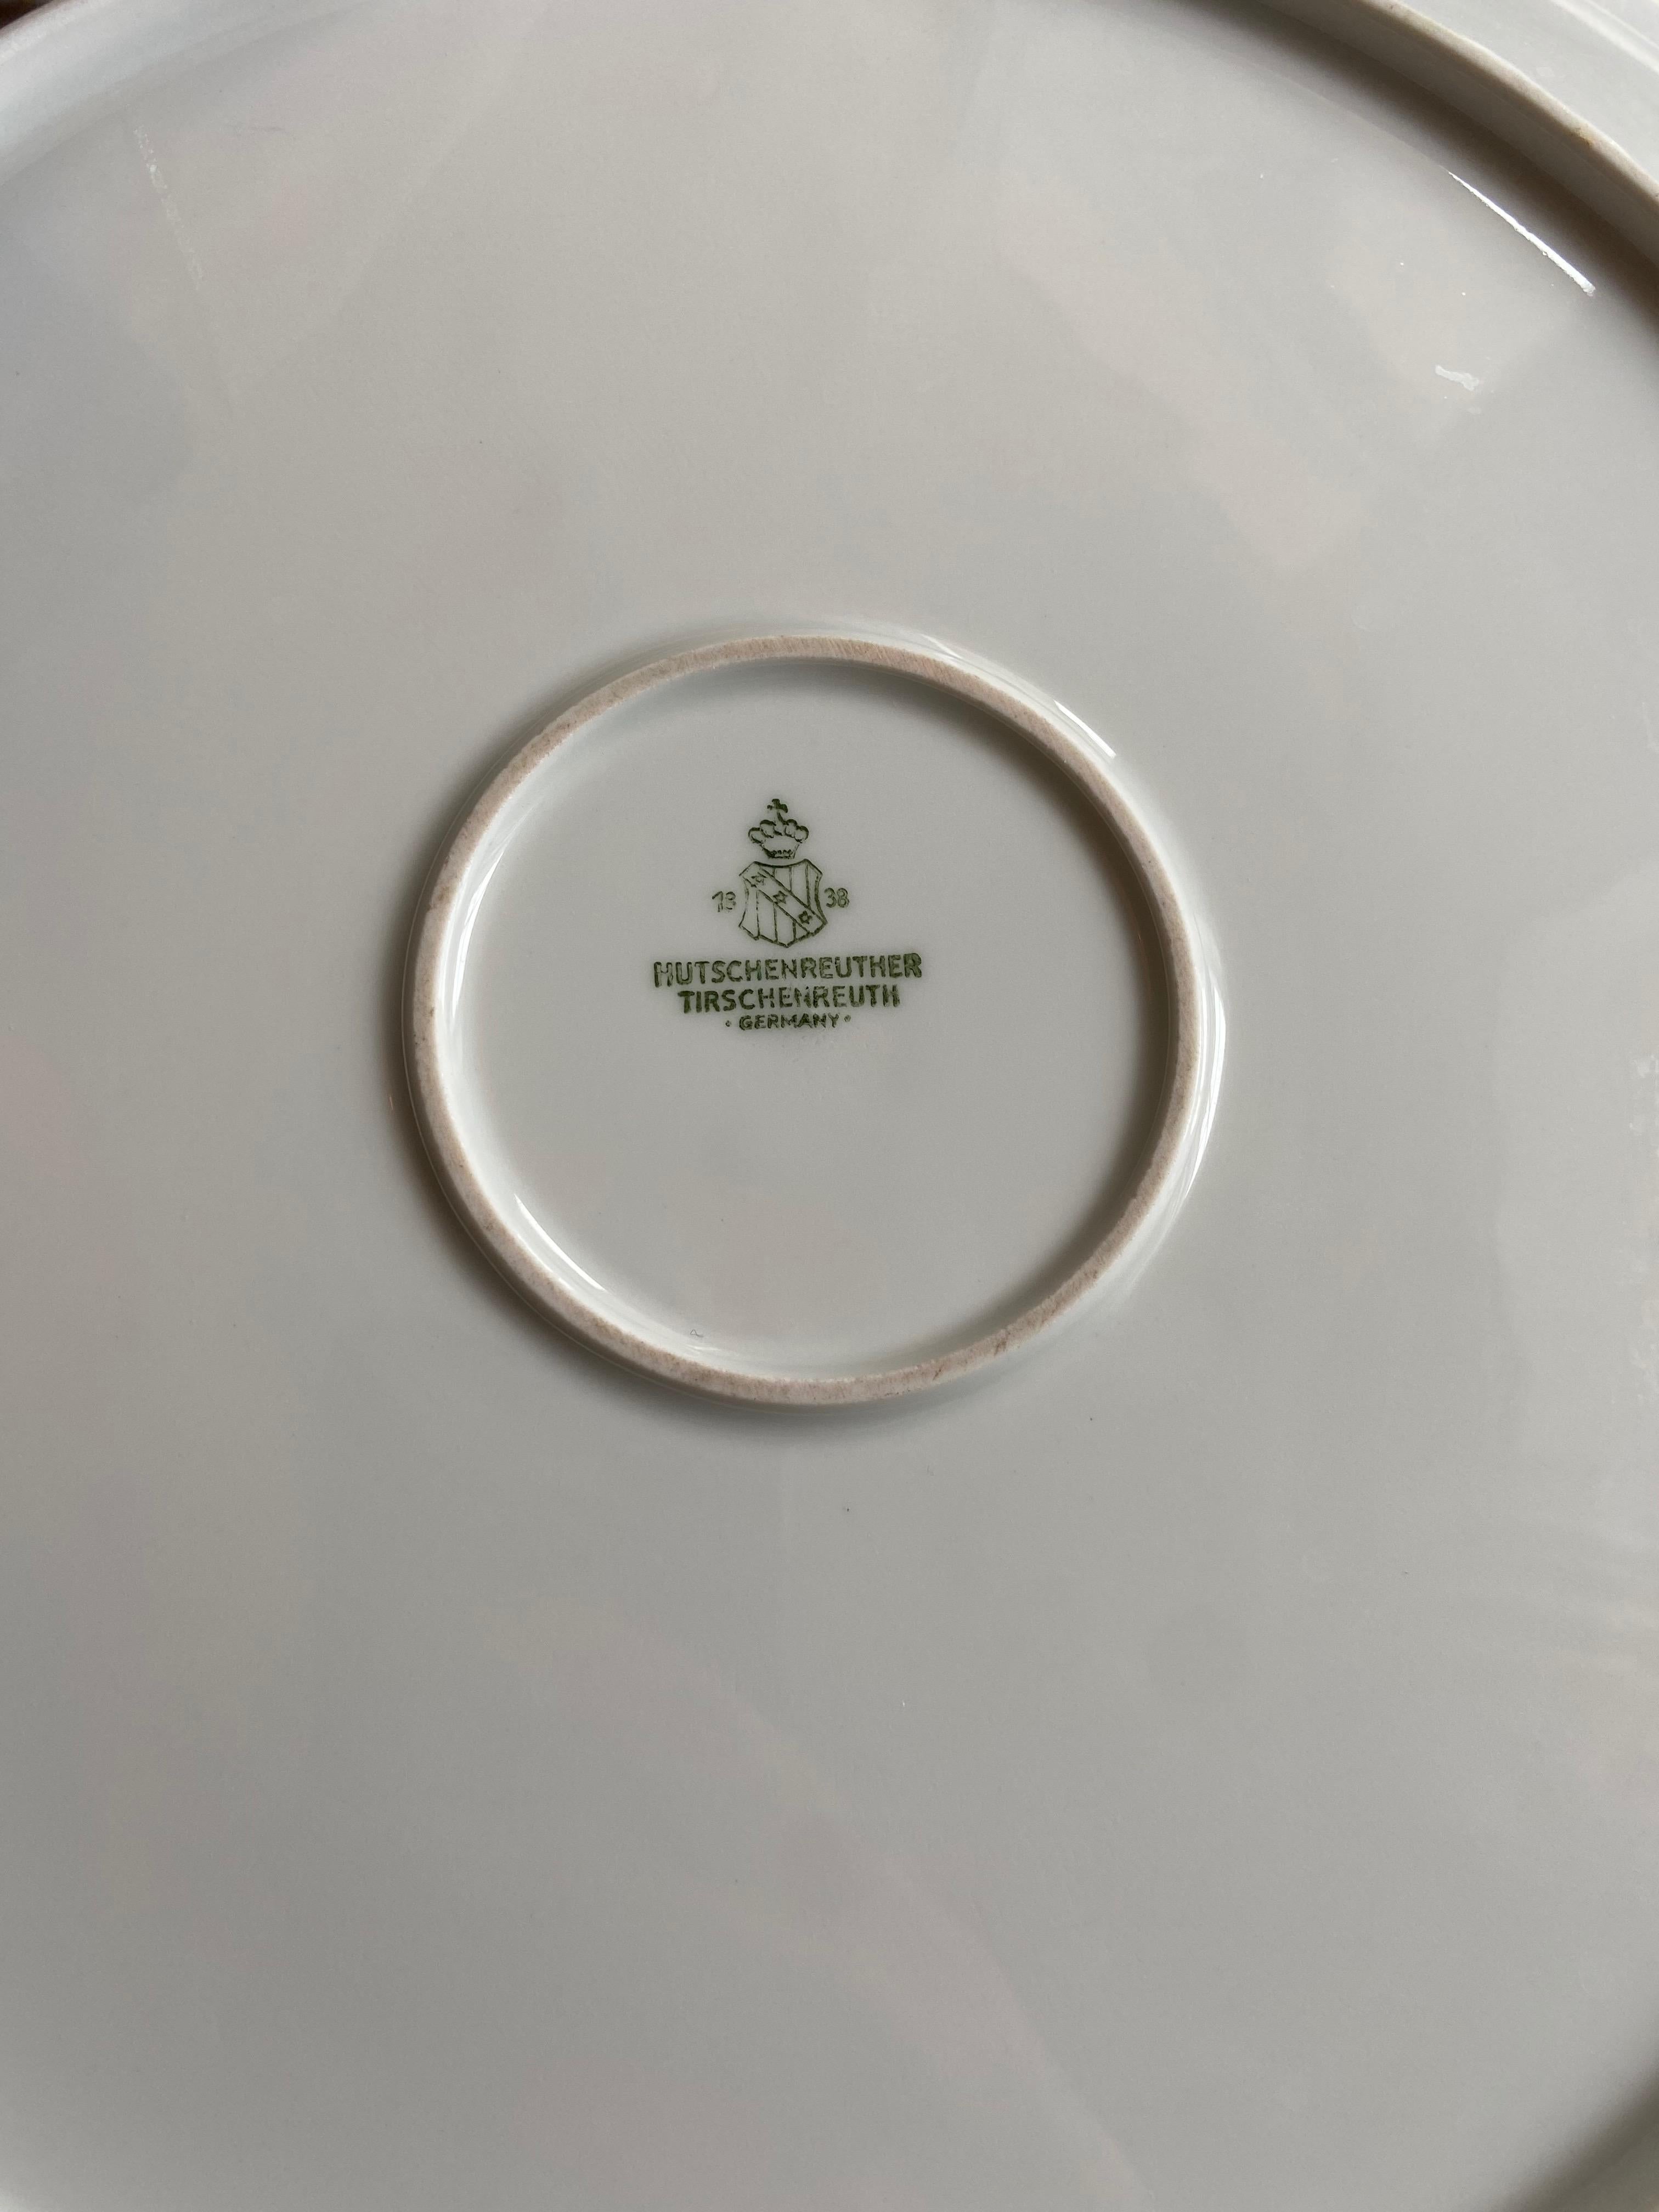 Mid Century, Dining Service, Tirschenreuth Germany, Neoclassical, Porcelain For Sale 2